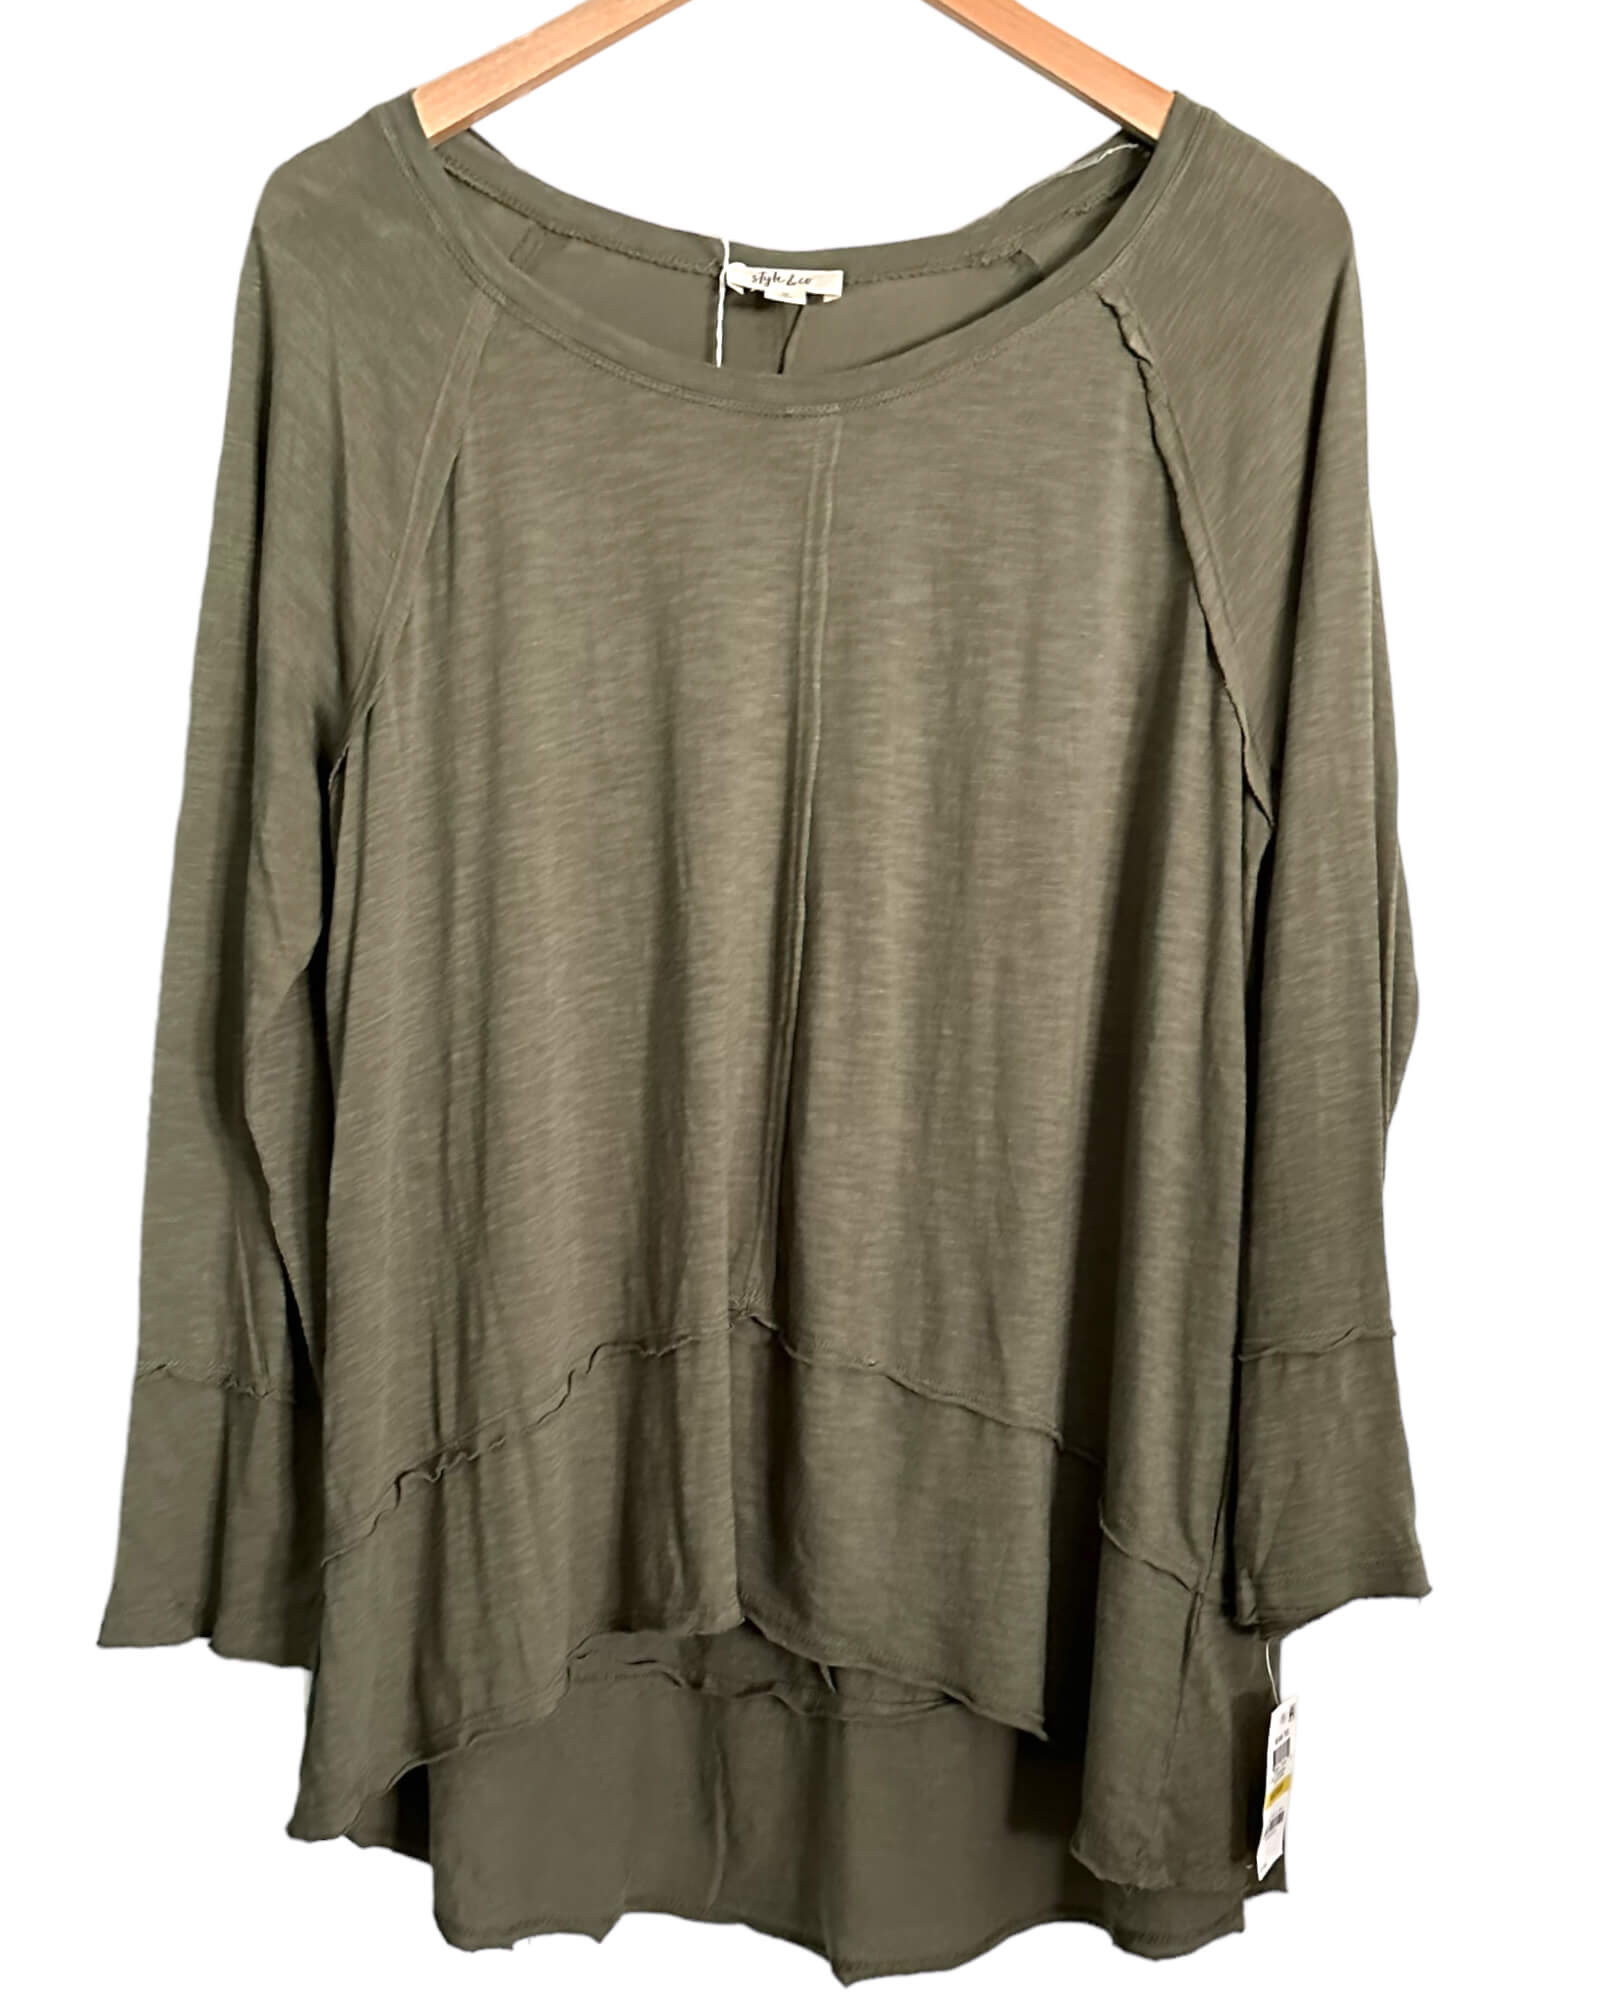 Soft Autumn STYLE&CO olive sprig green swing tee